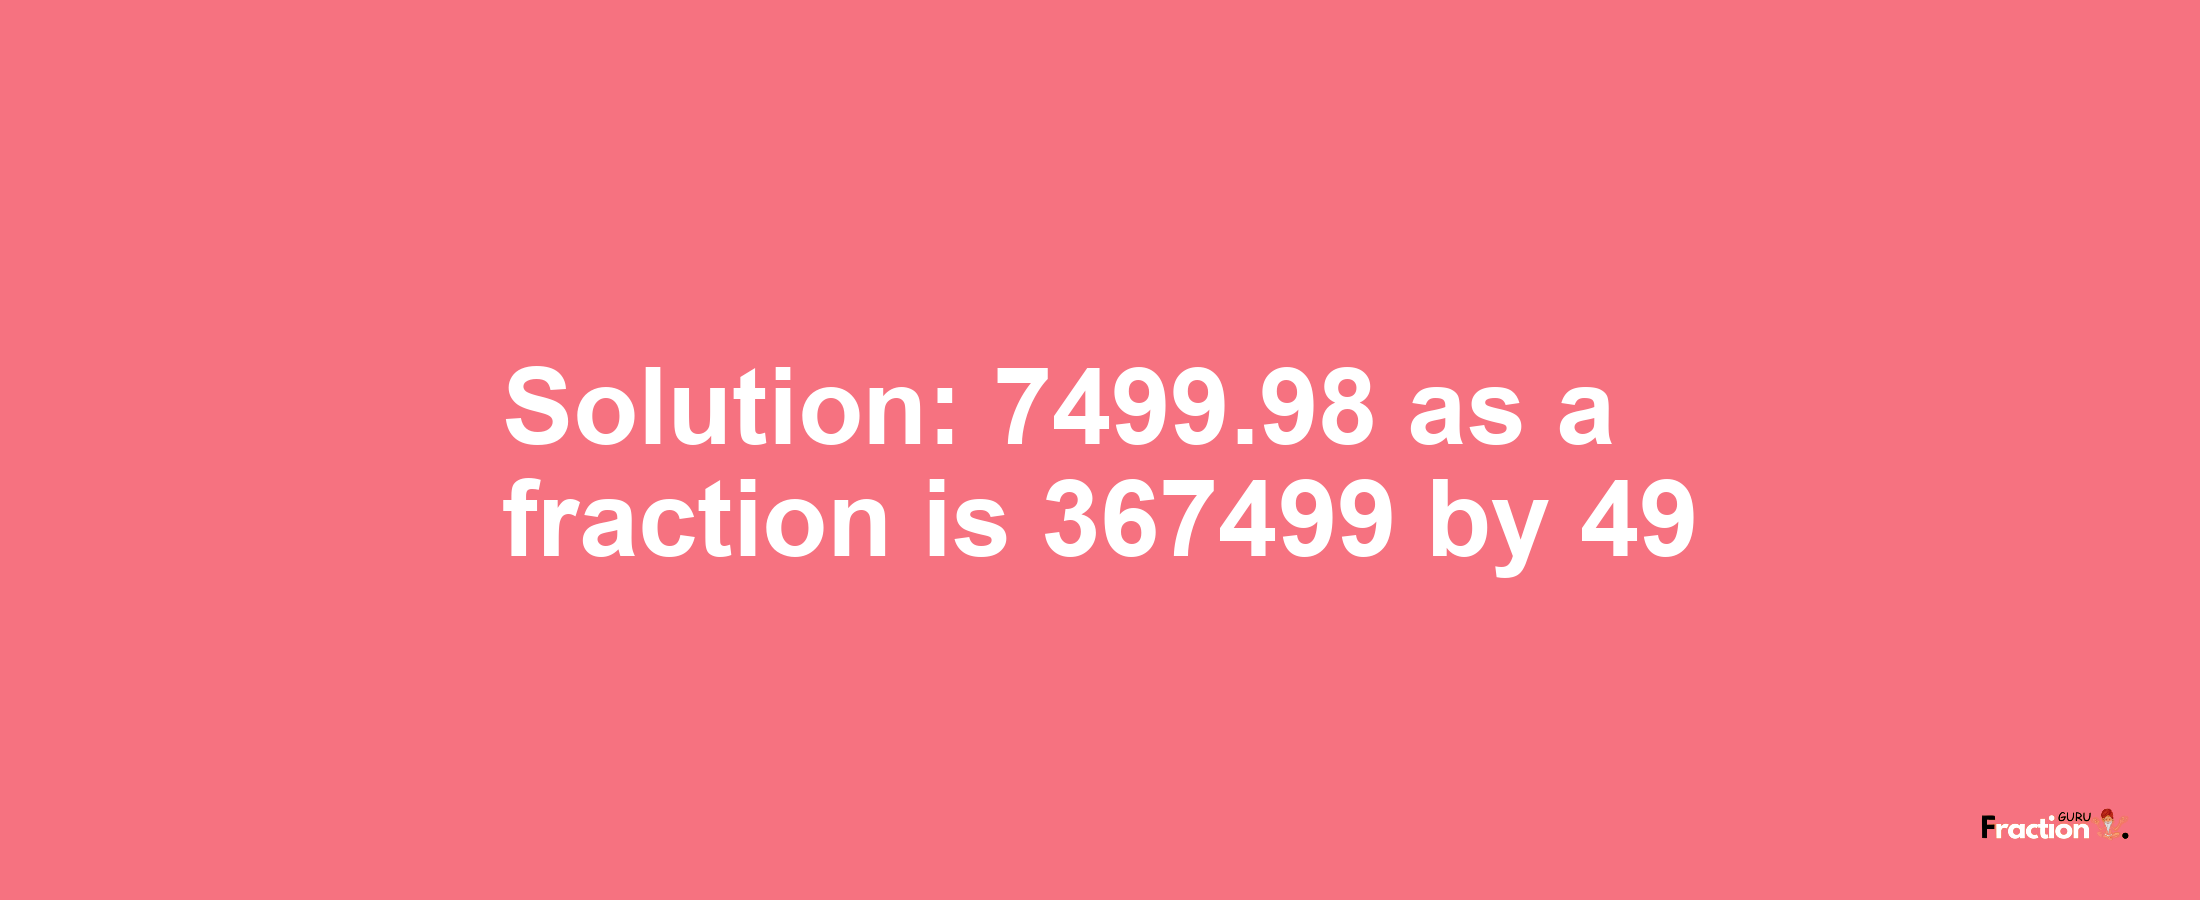 Solution:7499.98 as a fraction is 367499/49